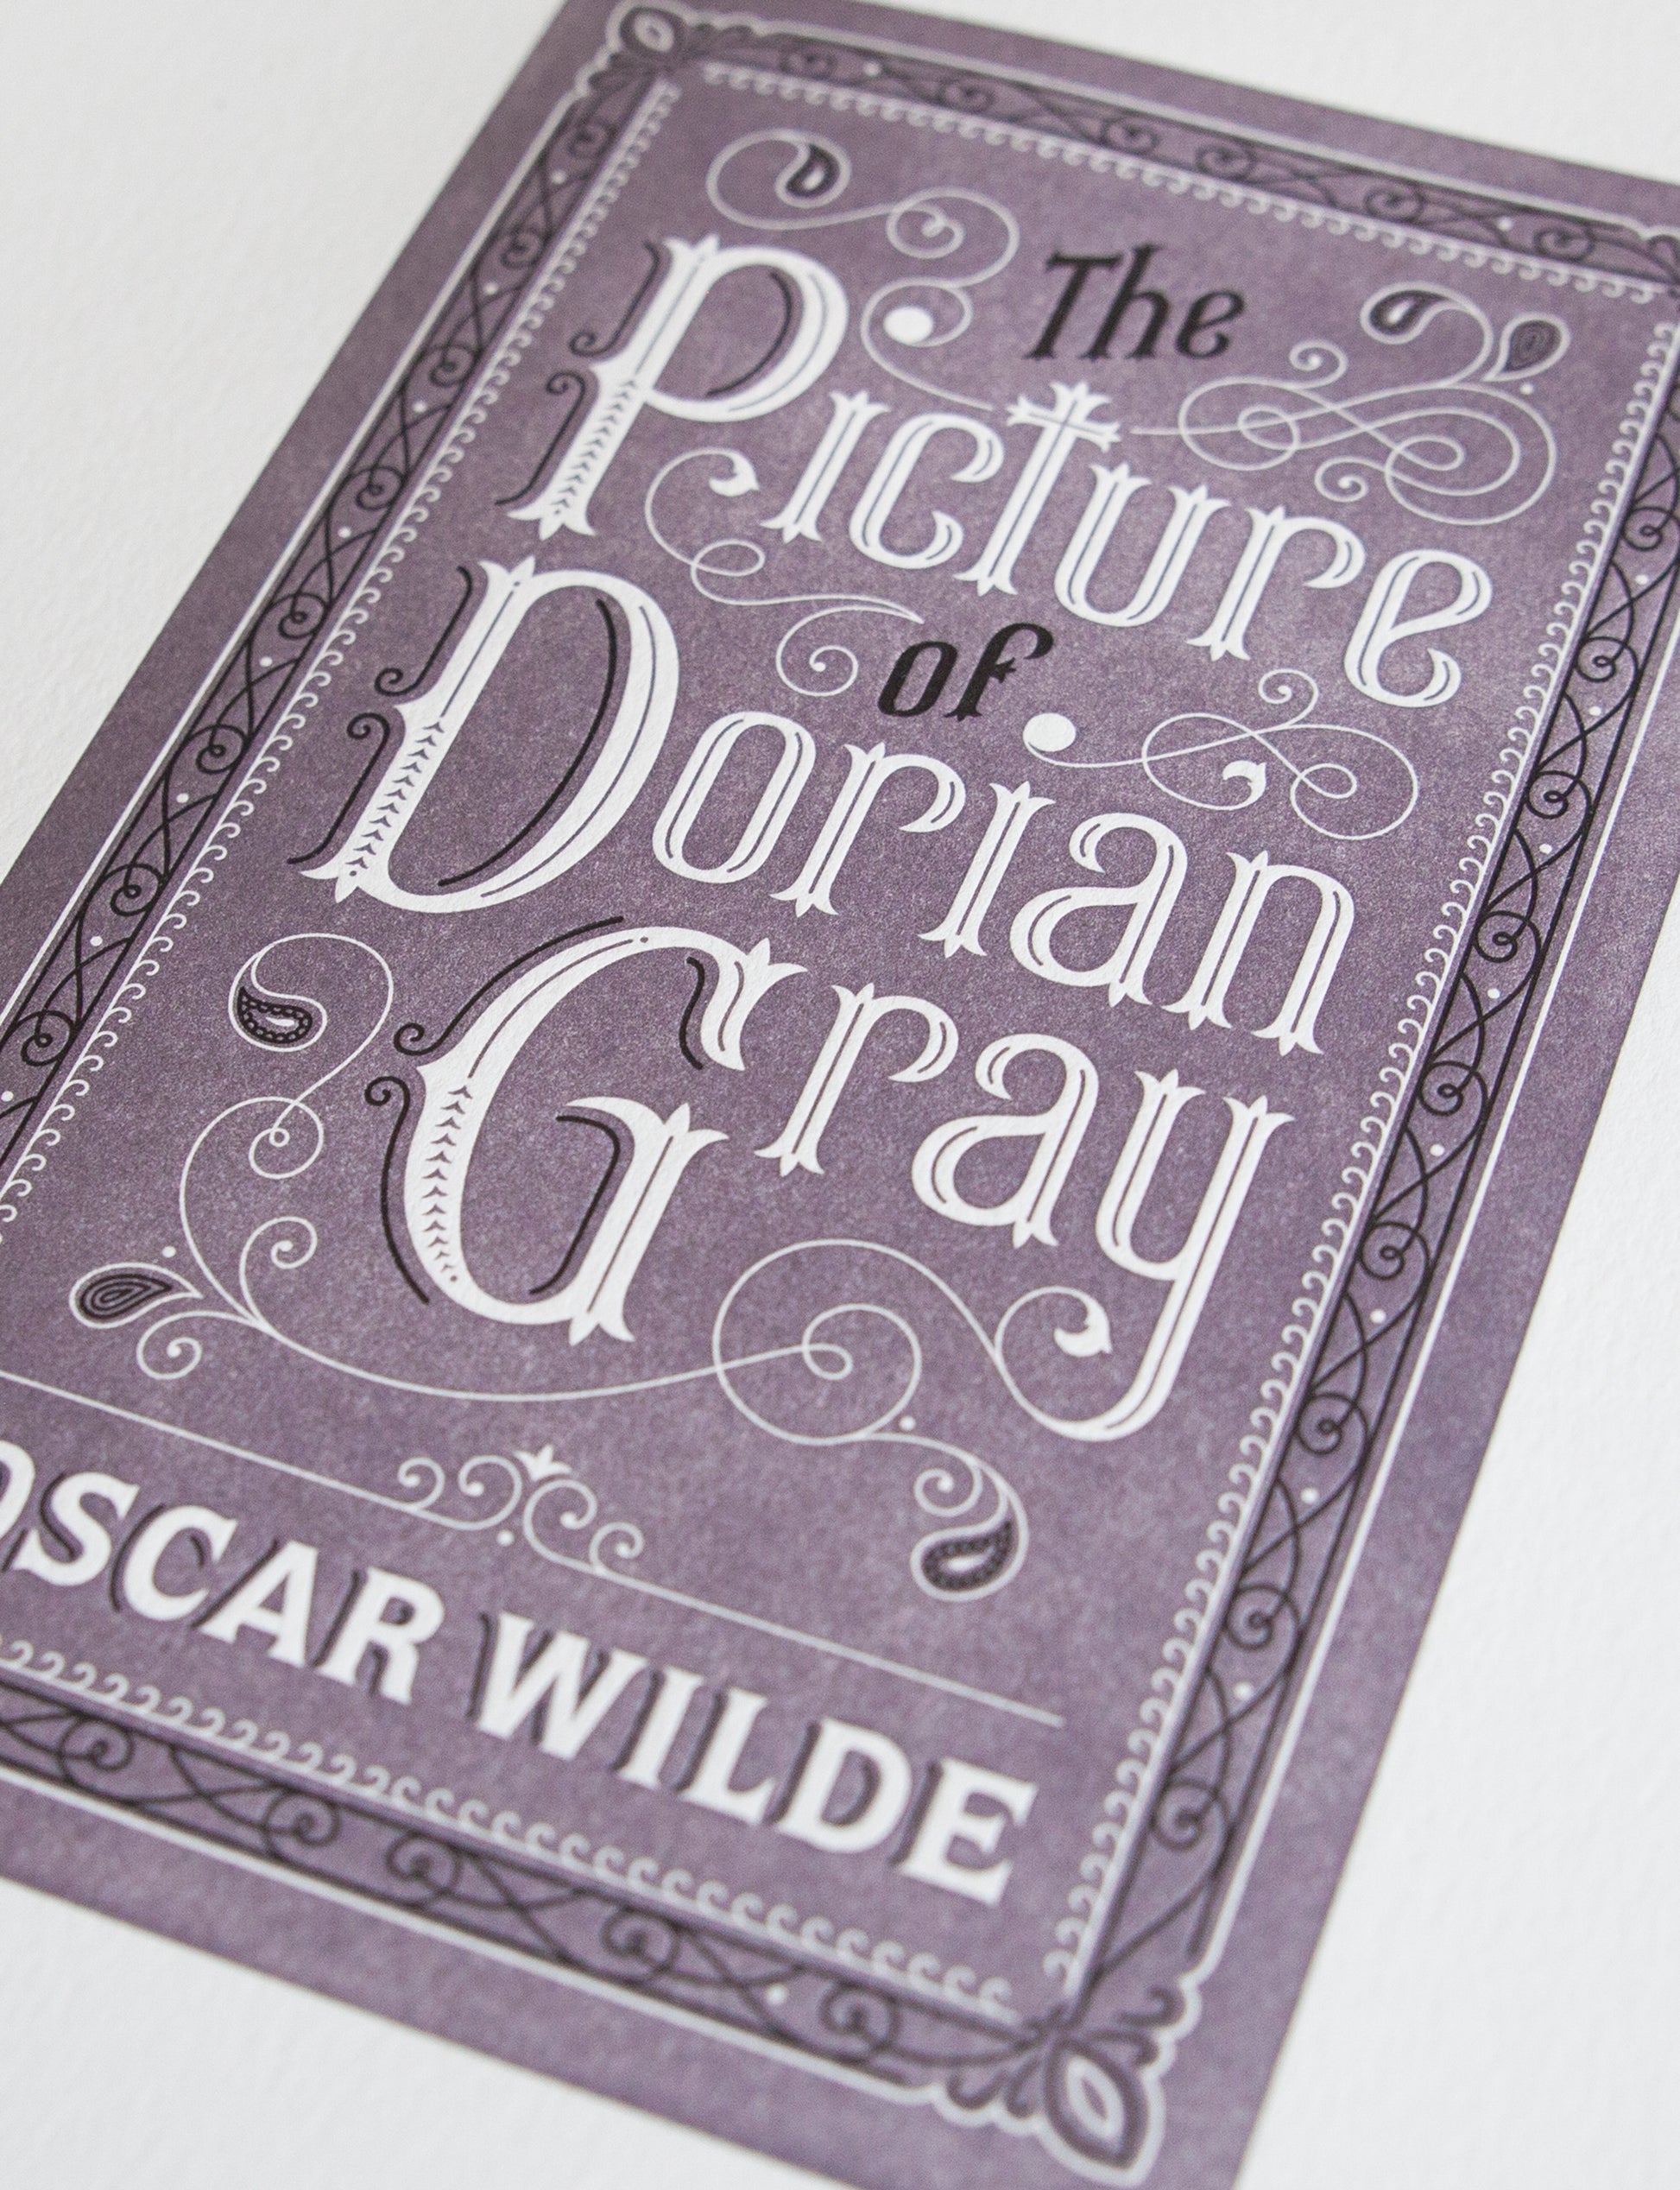 the picture of dorian gray book cover